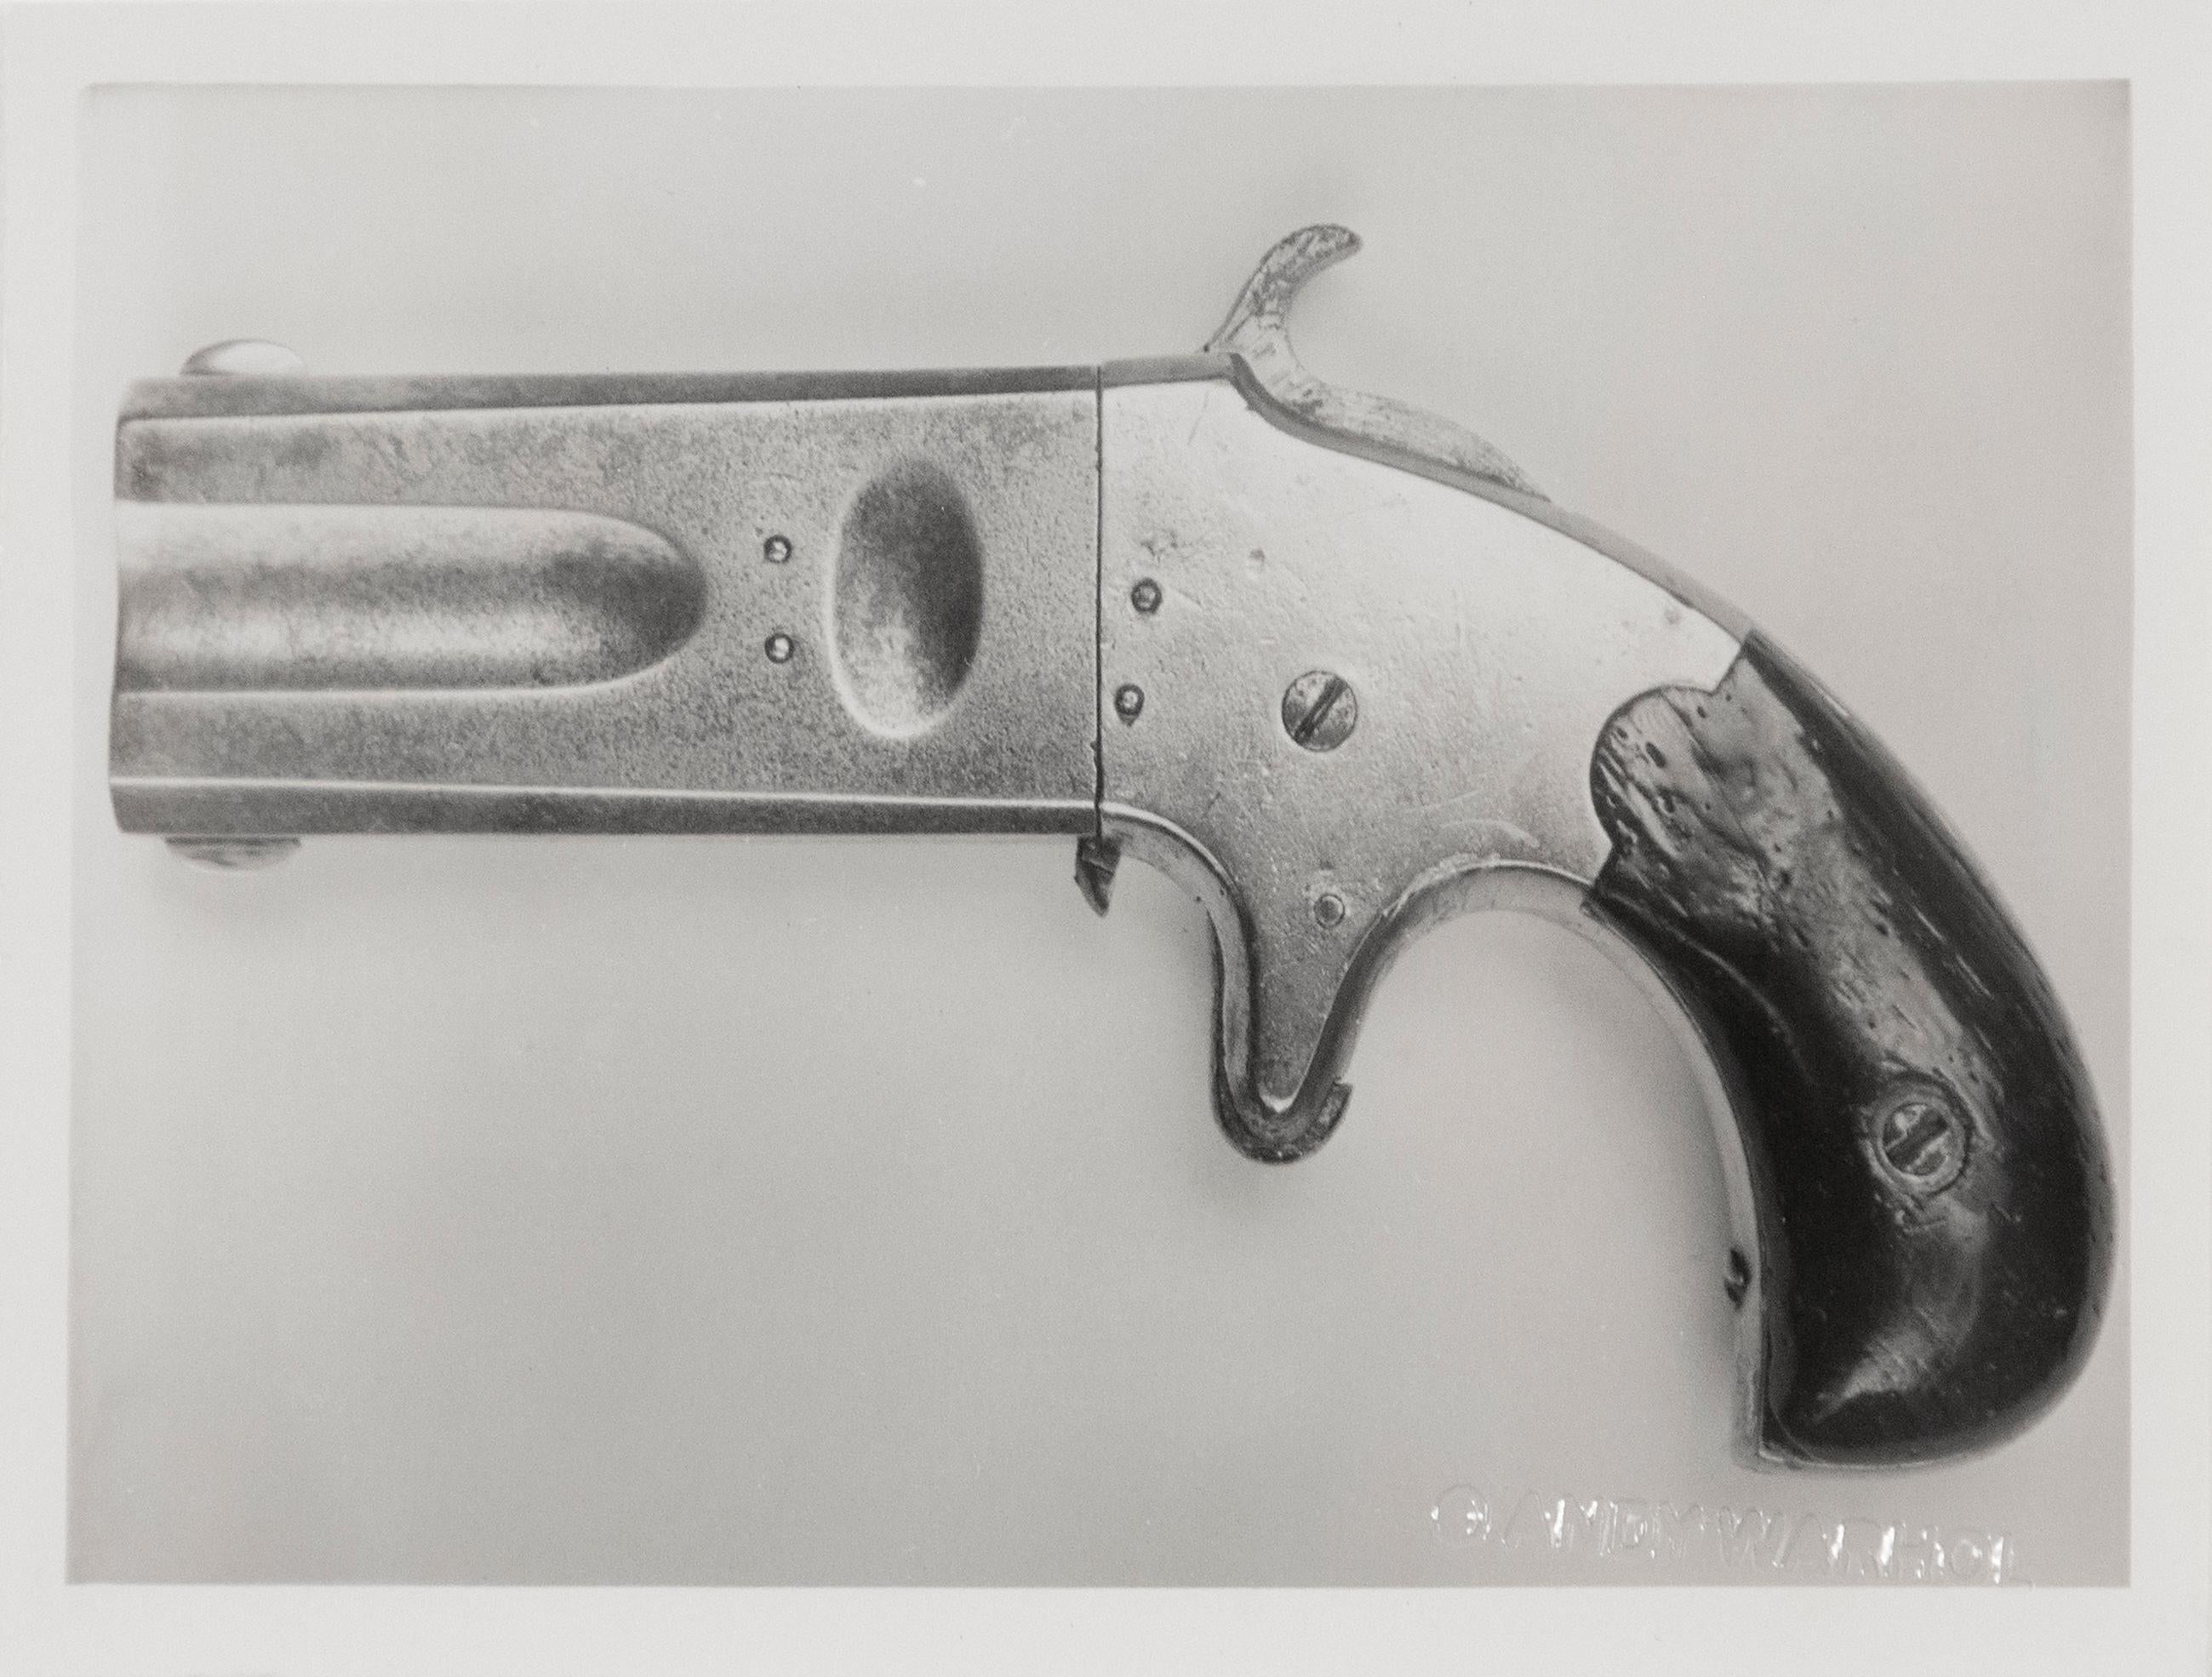 One Pistol  - Photograph by Andy Warhol